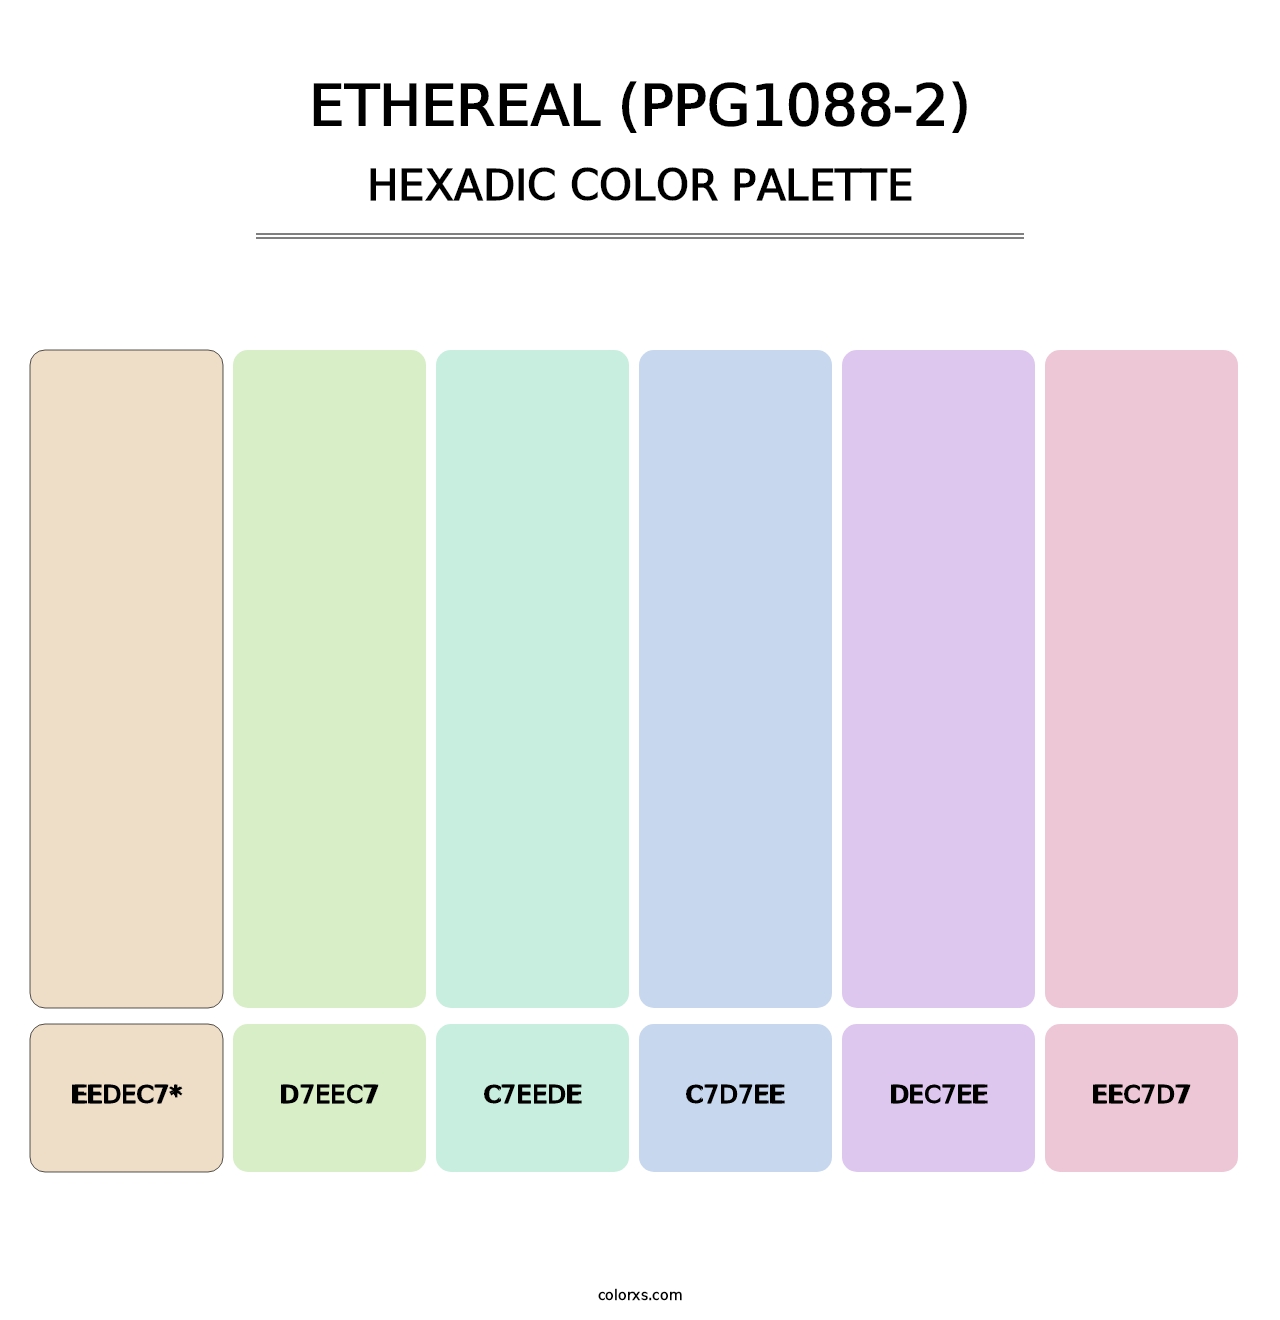 Ethereal (PPG1088-2) - Hexadic Color Palette